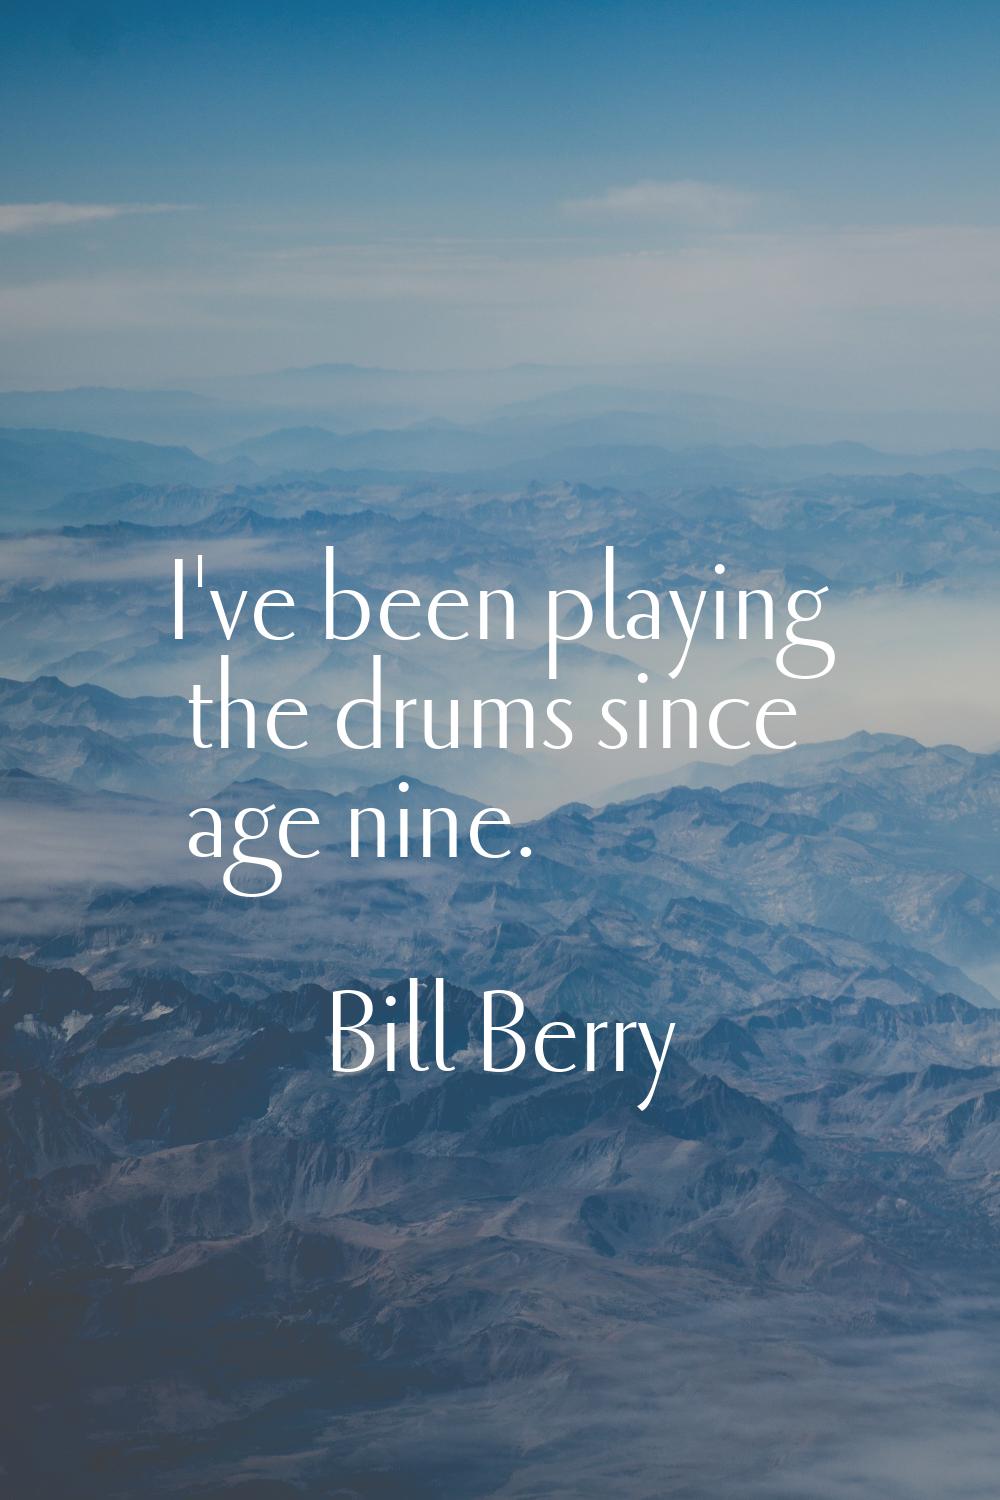 I've been playing the drums since age nine.